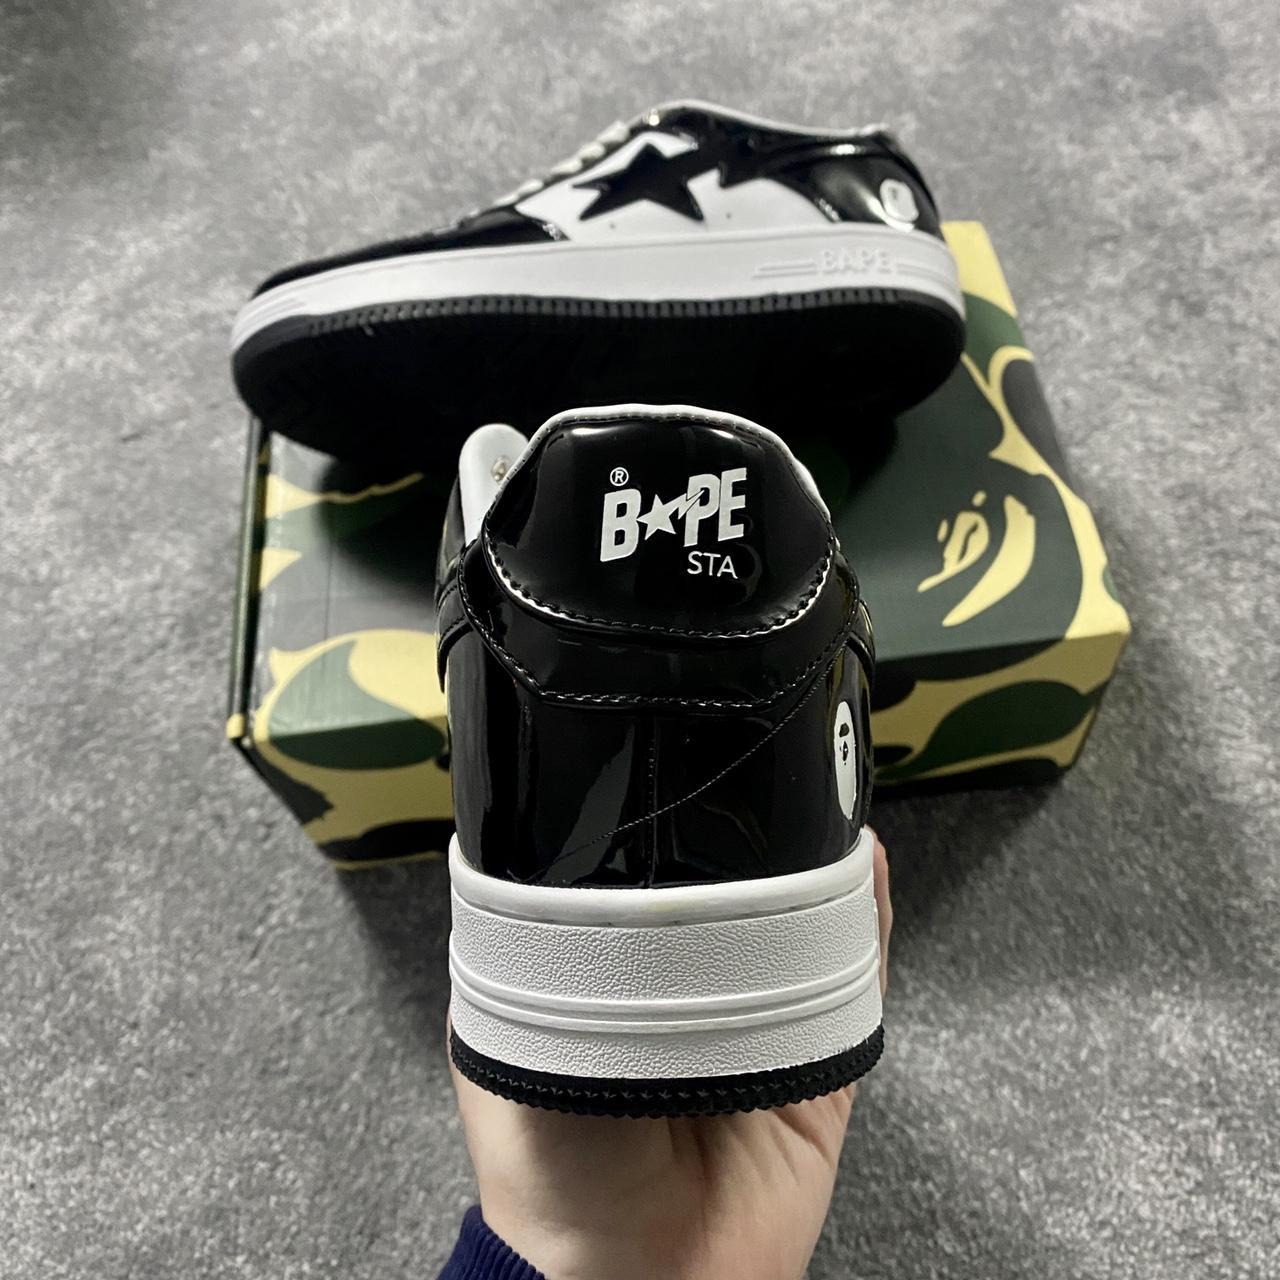 Bapesta Trainers Black and White ⛔️MESSAGE ME BEFORE... - Depop